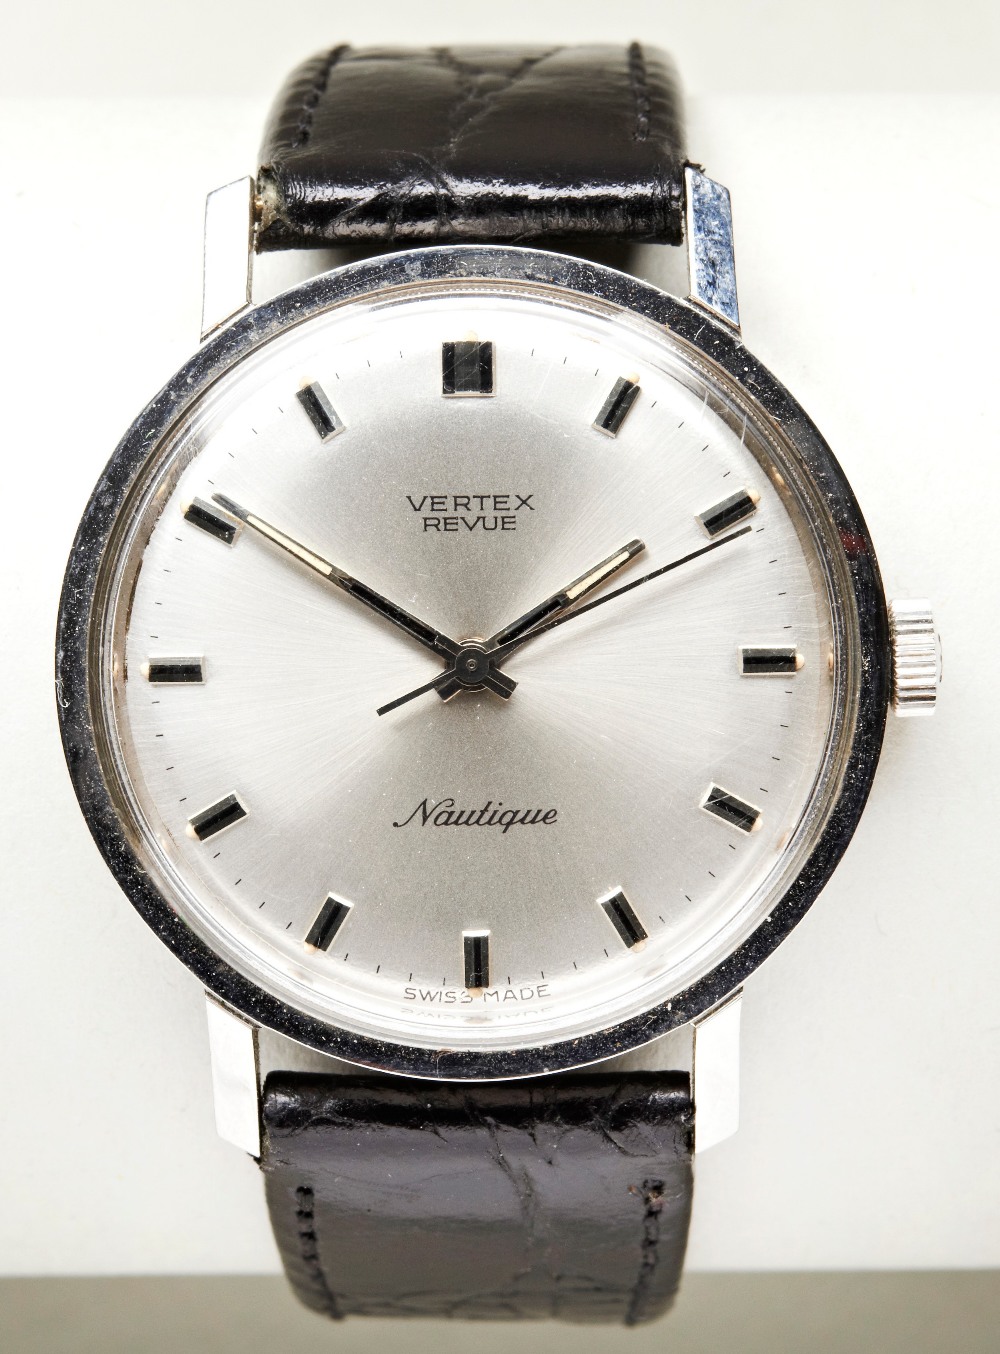 VERTEX REVUE NAUTIQUE STEEL WATCH, c1960s, with baton numerals and silvered dial and later leather